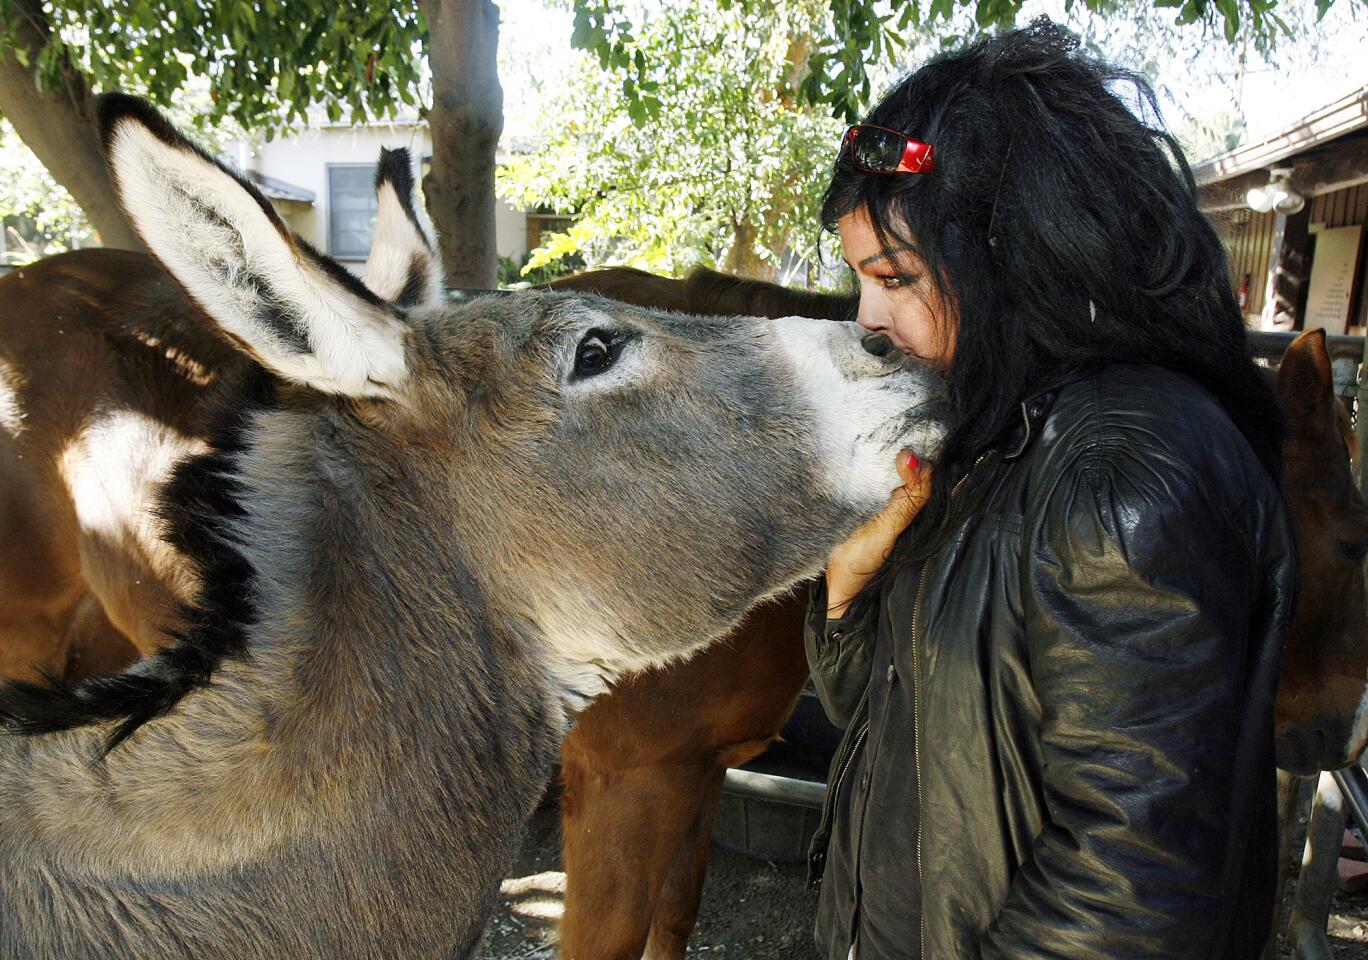 Mona Lisa, a zonkey, and Mara Baygulova, share a kiss in a corral in Glendale on Thursday, January 26, 2012. Mona Lisa, a 17-year-old zonkey, a cross between a donkey and a zebra, was rescued by Baygulova when it was four.